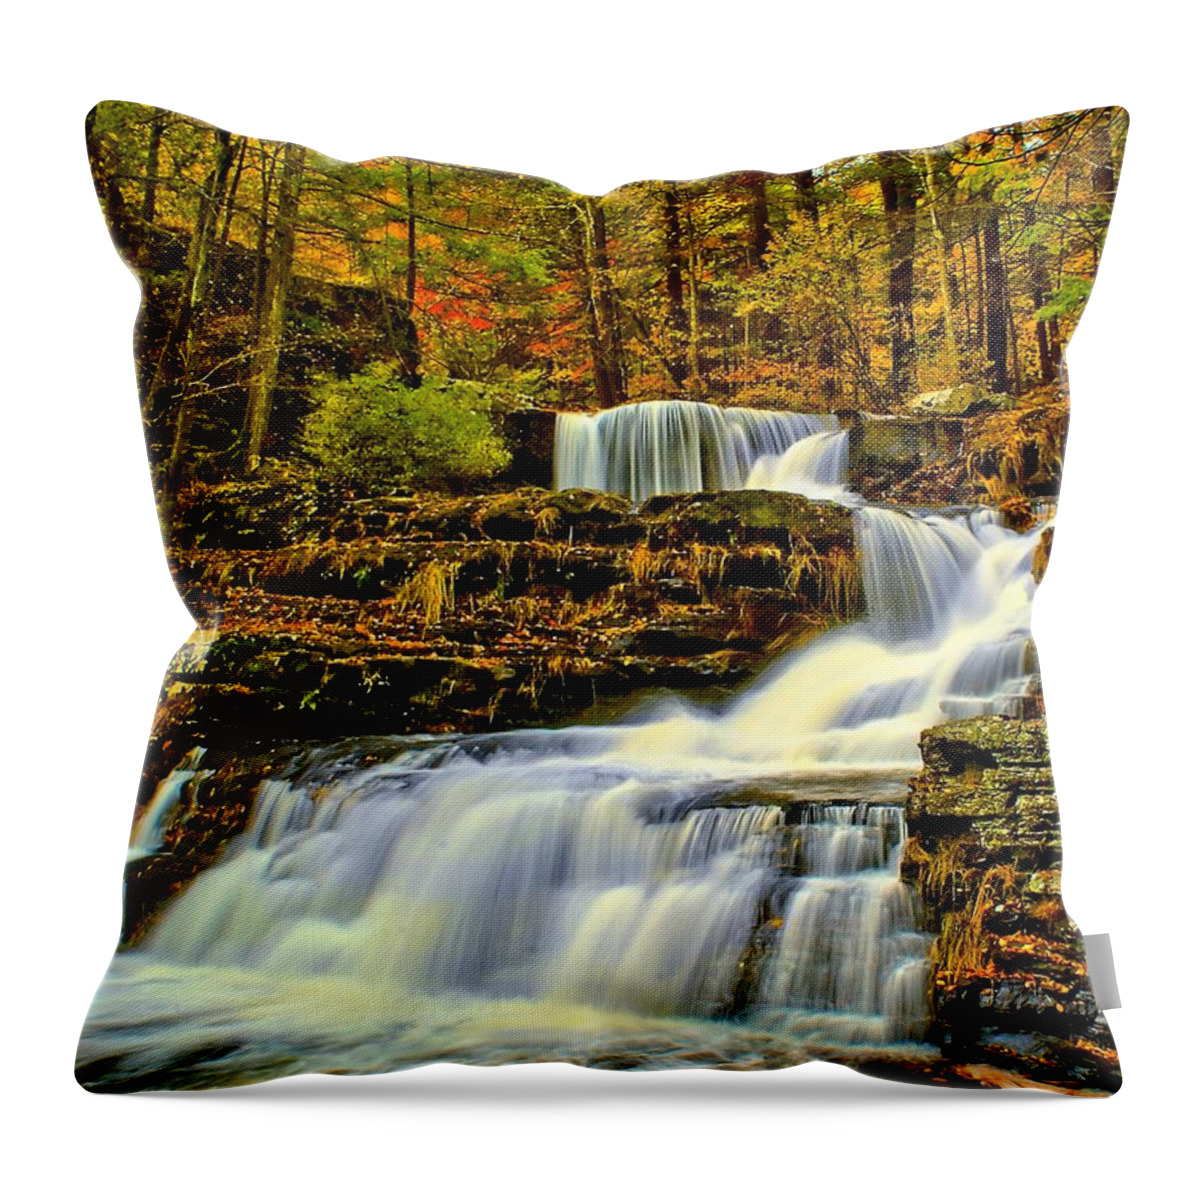 Autumn Throw Pillow featuring the photograph Autumn by the Waterfall by Nick Zelinsky Jr